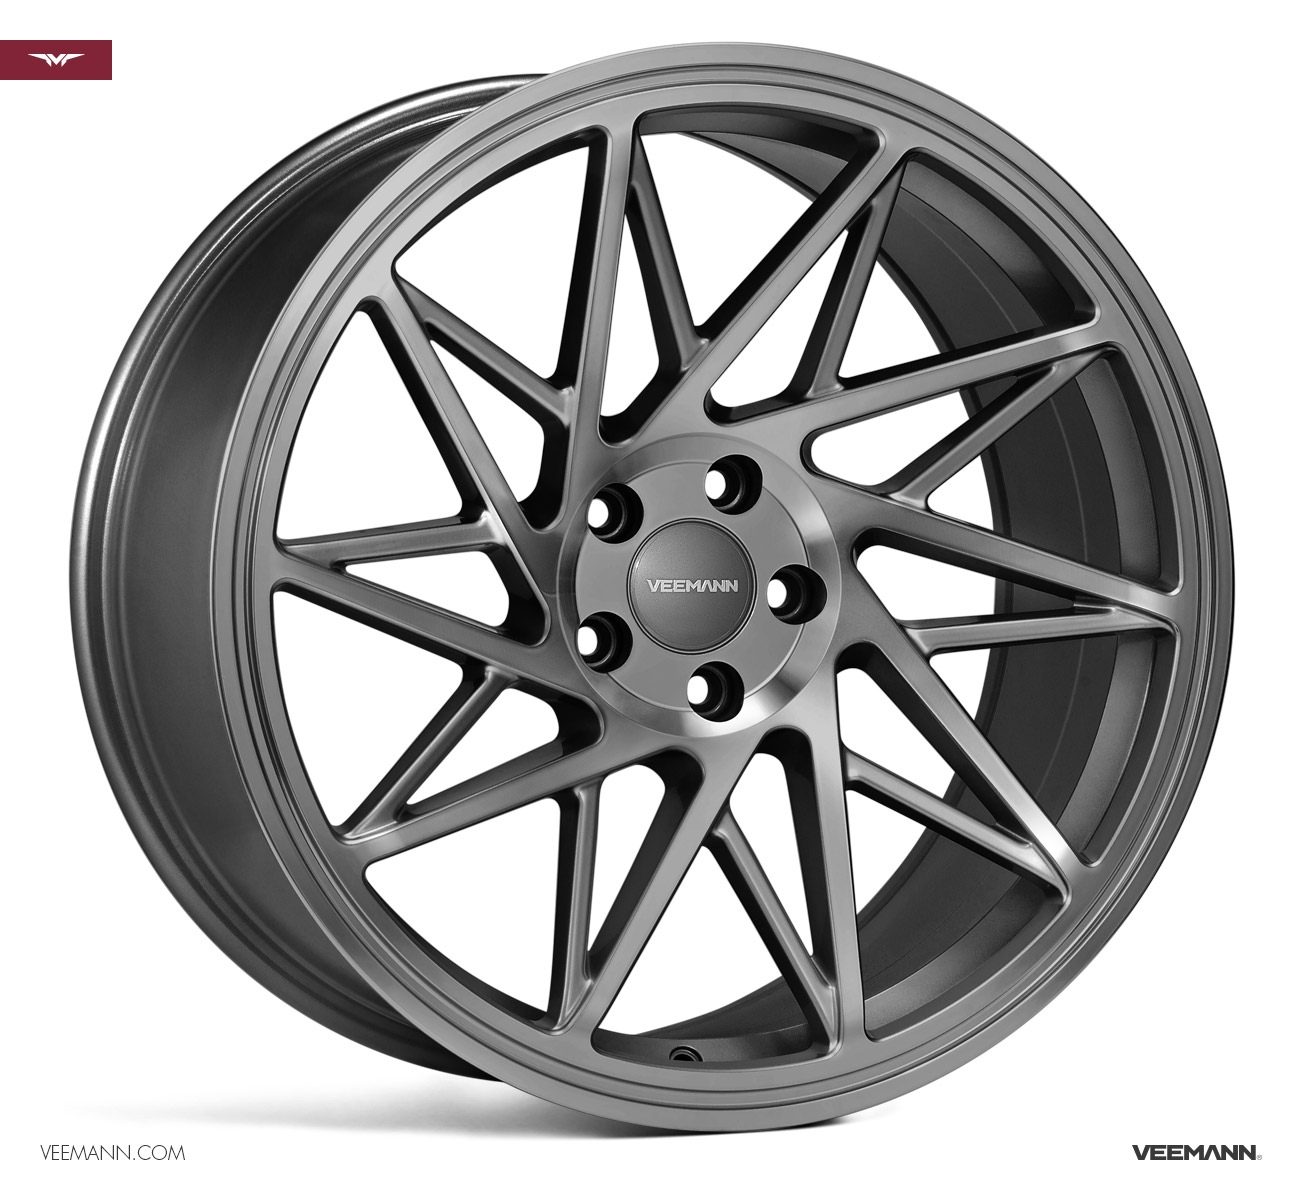 NEW 19" VEEMANN V-FS35 ALLOY WHEELS IN GLOSS GRAPHITE WITH WIDER 9.5" REARS ET35/42